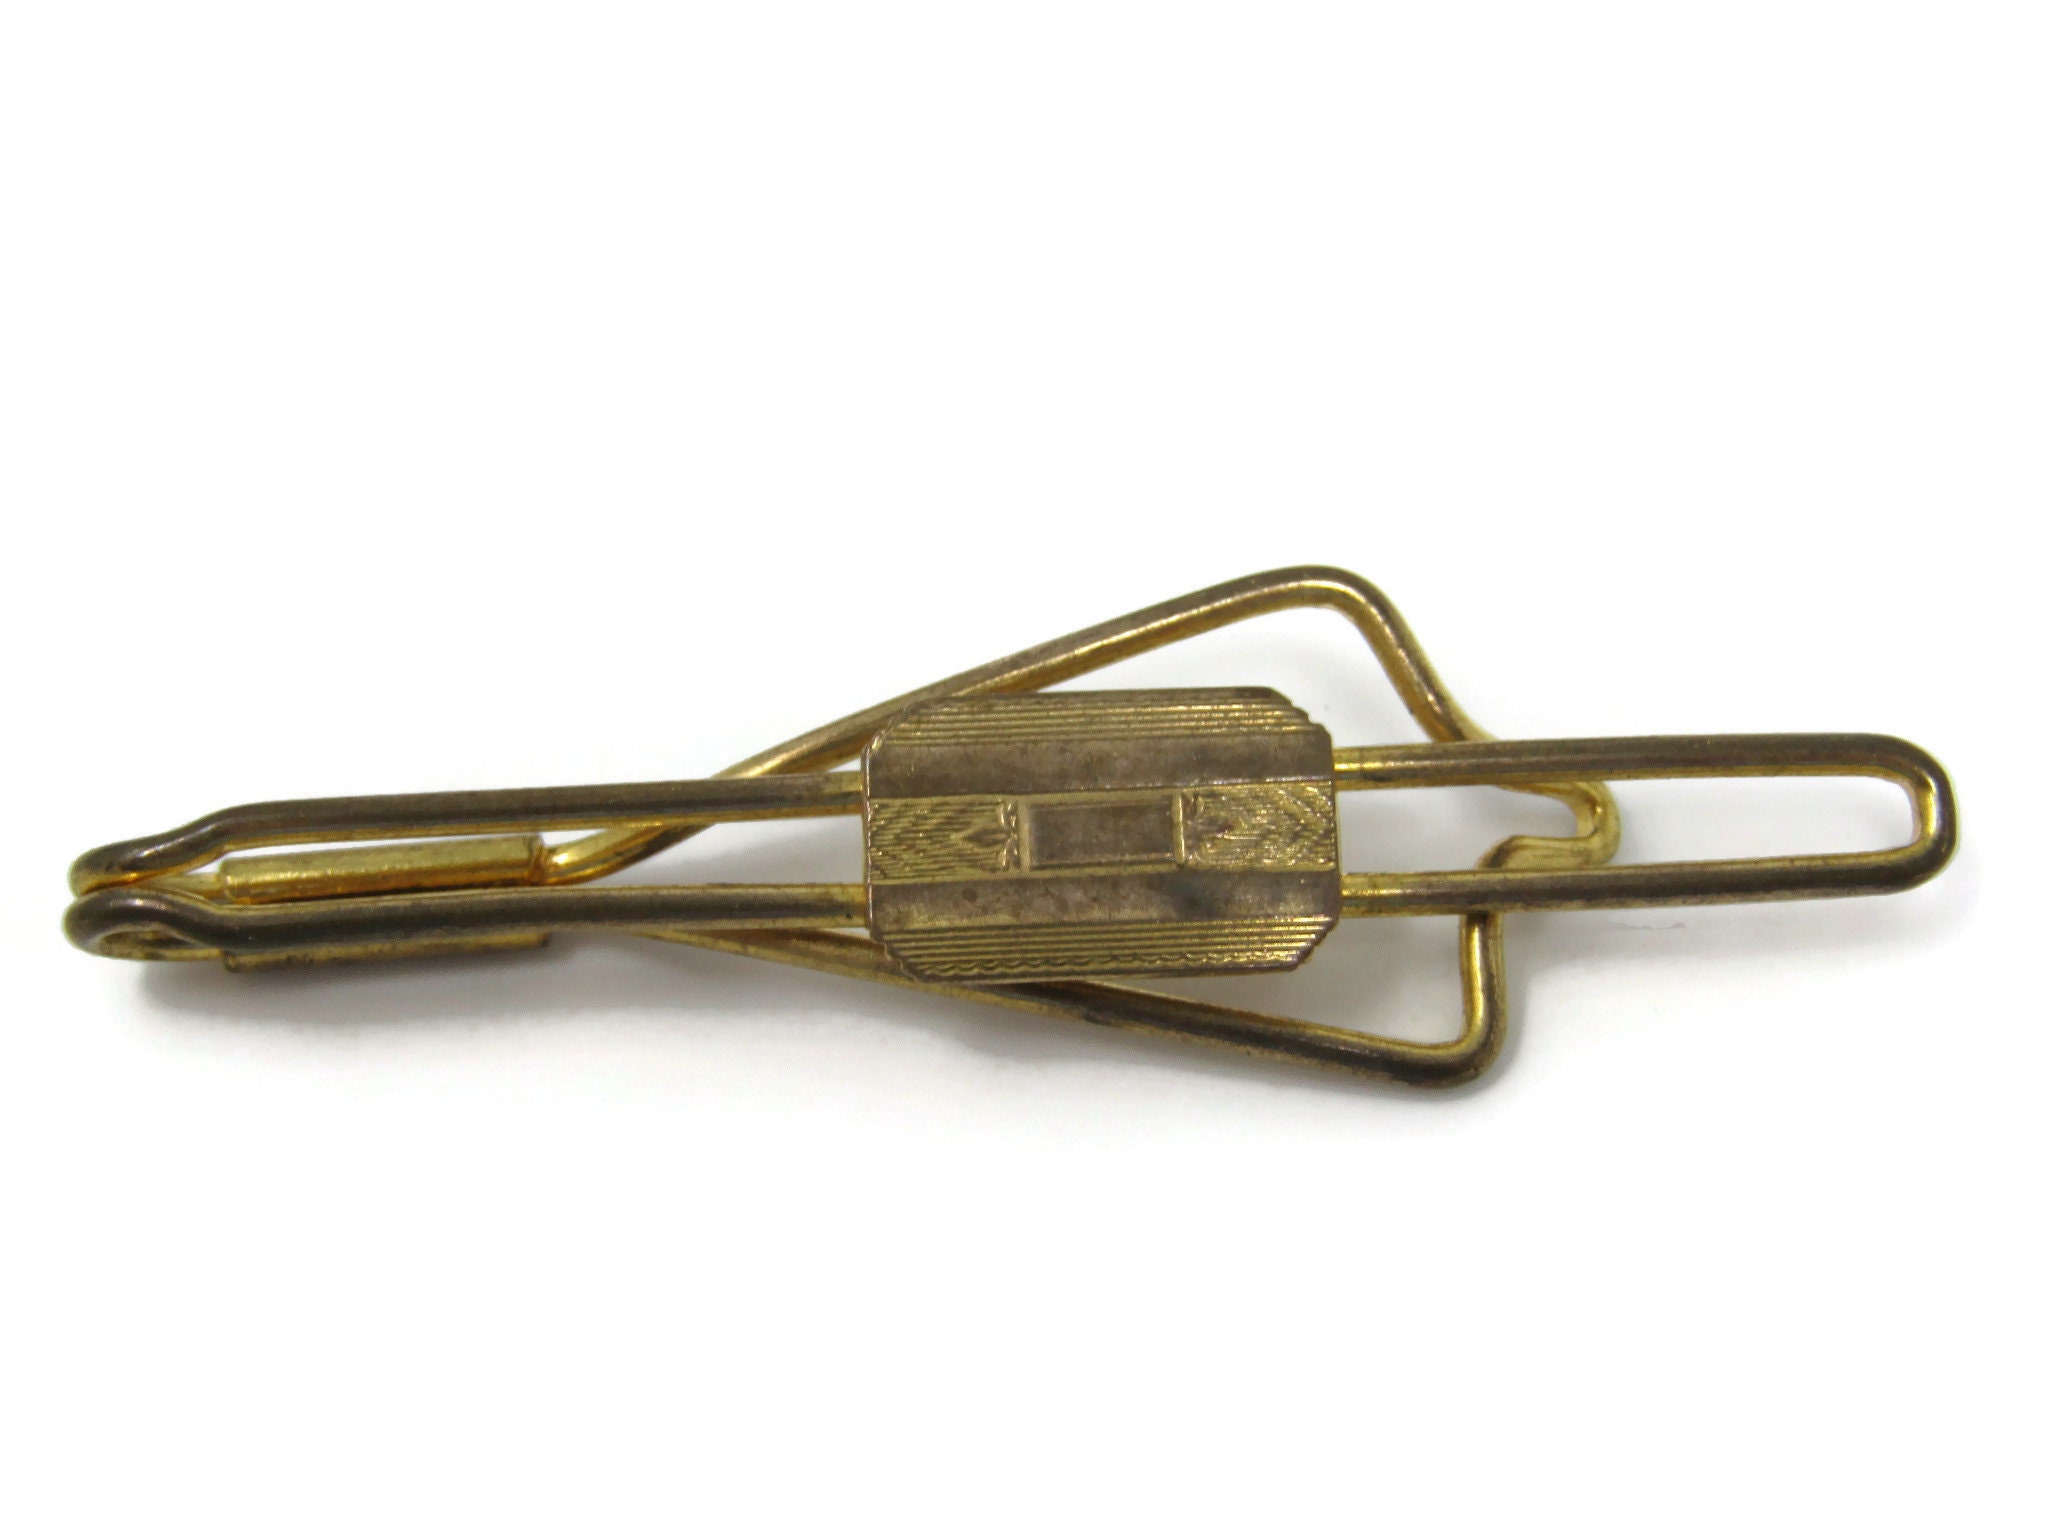 Art Deco Center Tie Clip Tie Bar: Vintage Gold Tone - Stand Out from ...